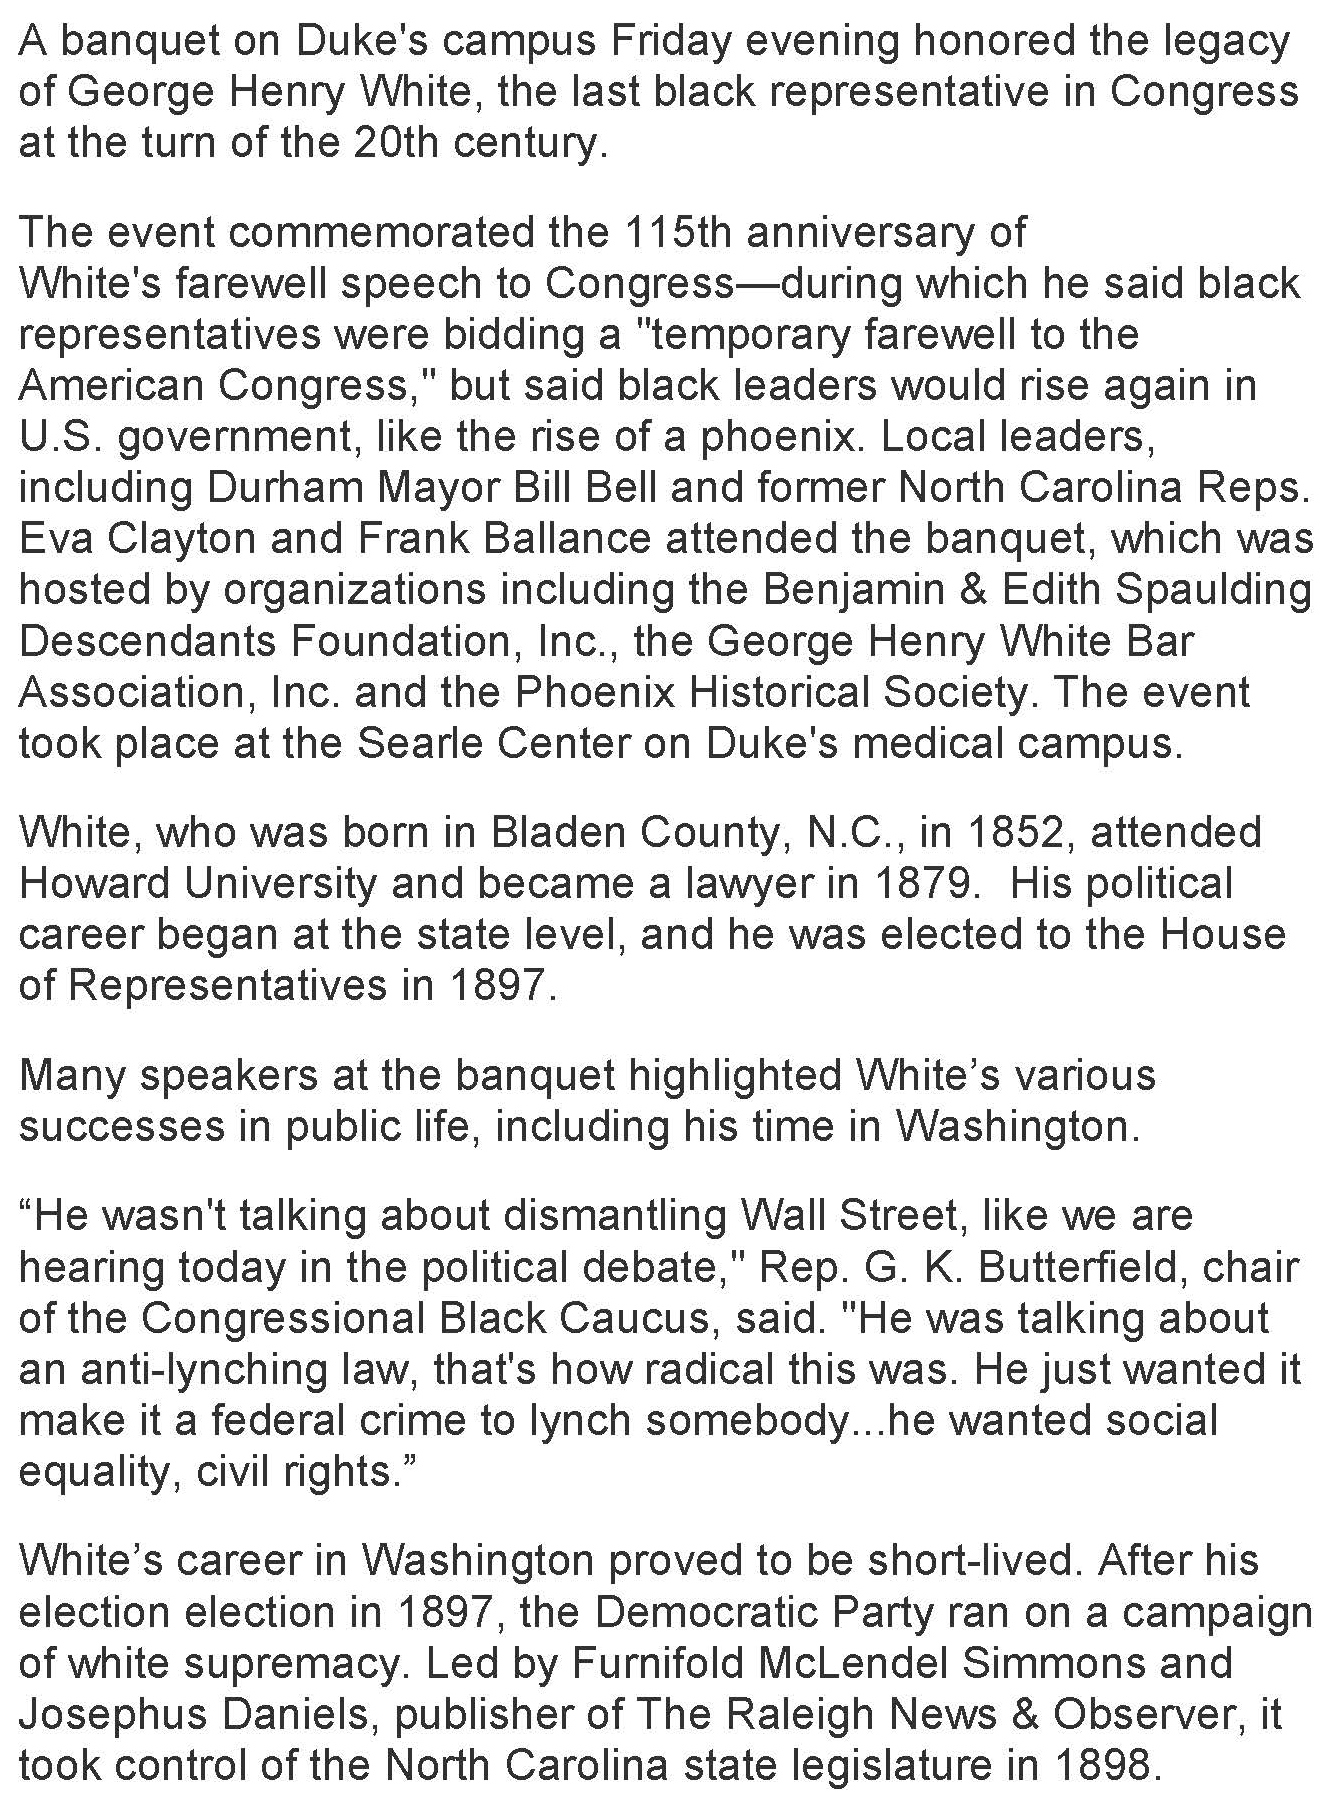 BH GW banquet article_Page_2